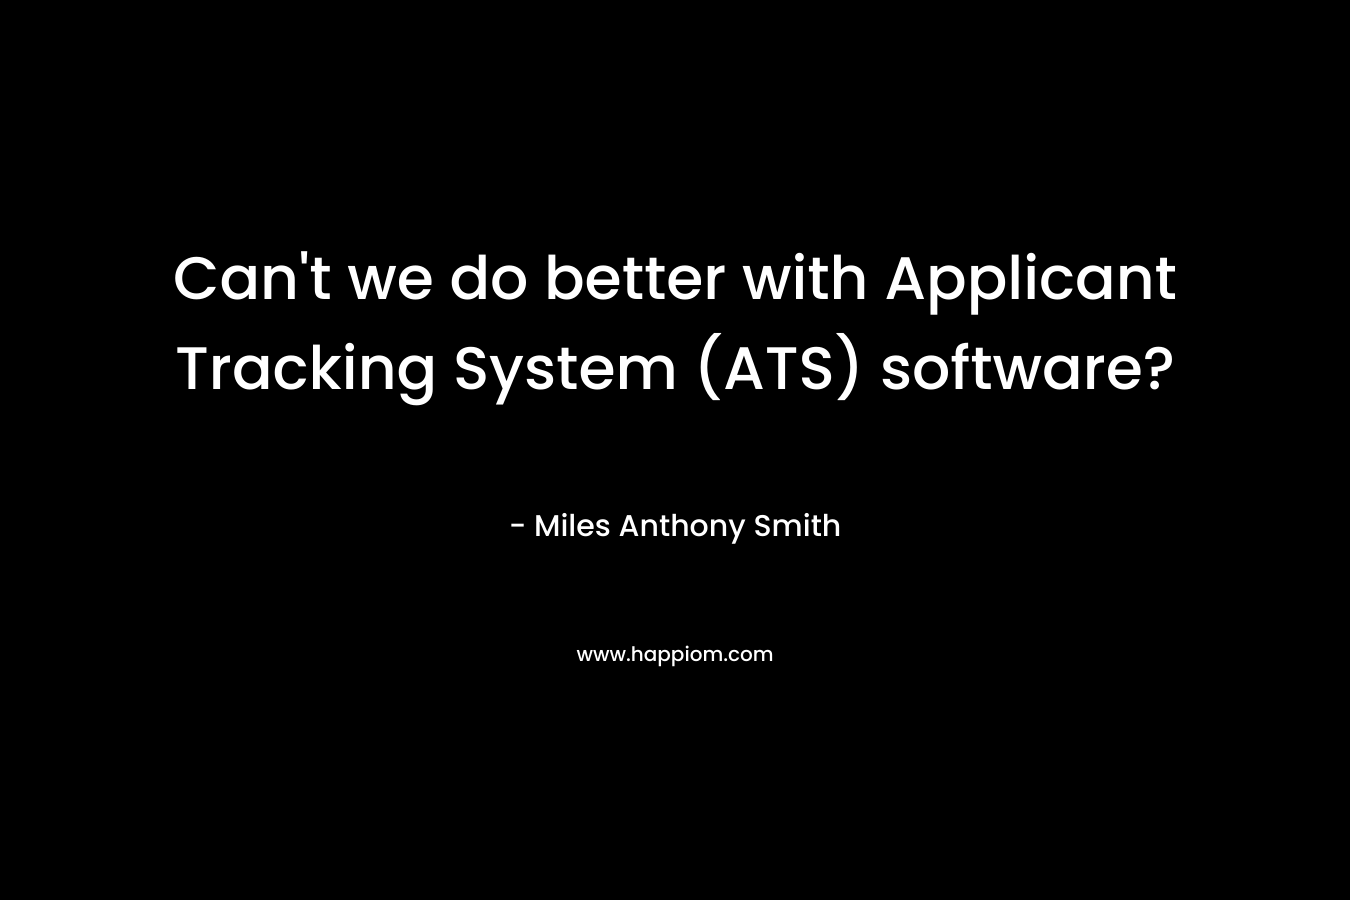 Can't we do better with Applicant Tracking System (ATS) software?